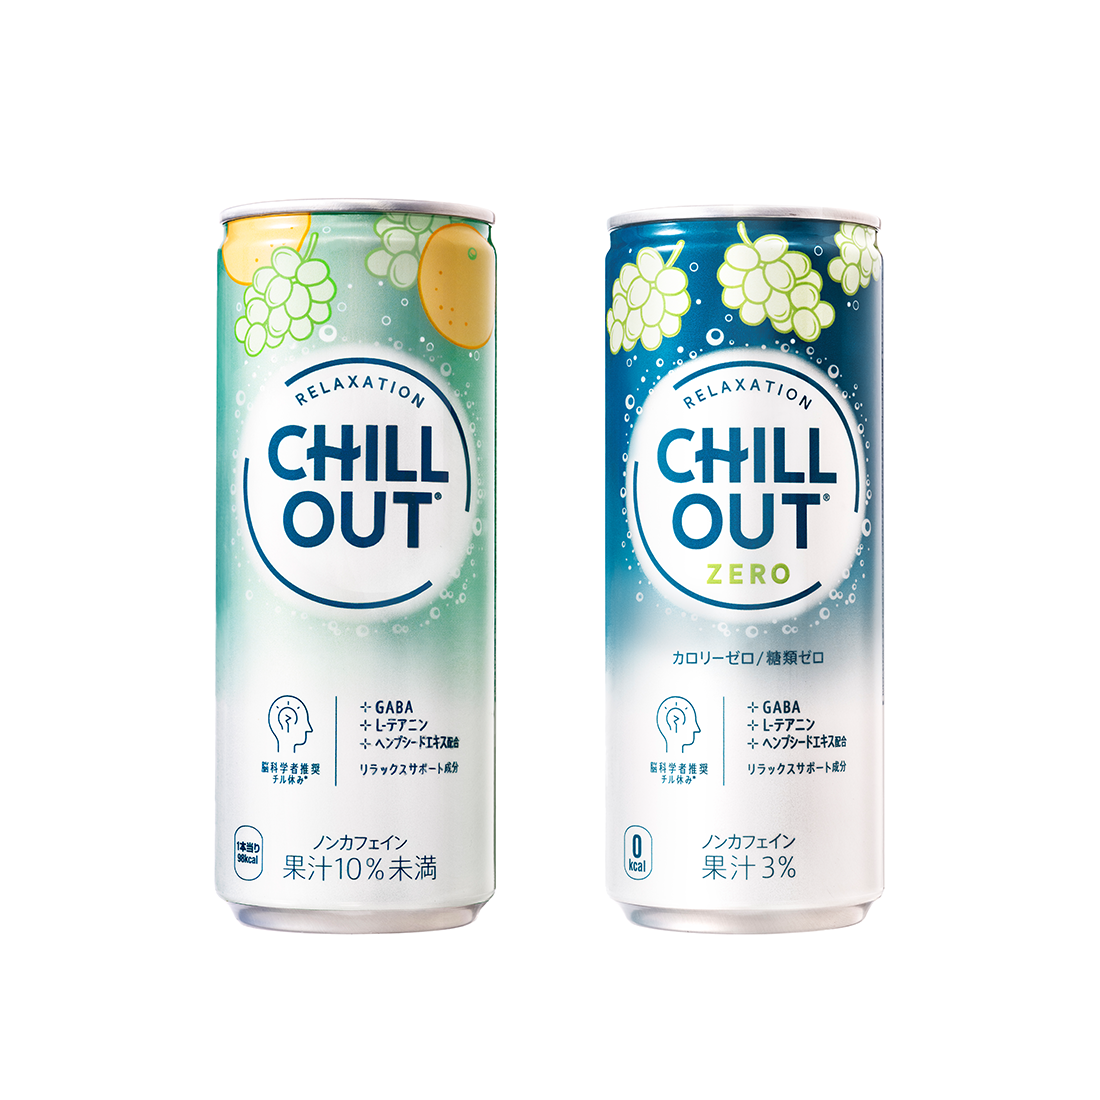 CHILL OUT ｜ 製品情報 ｜ 日本コカ・コーラ株式会社